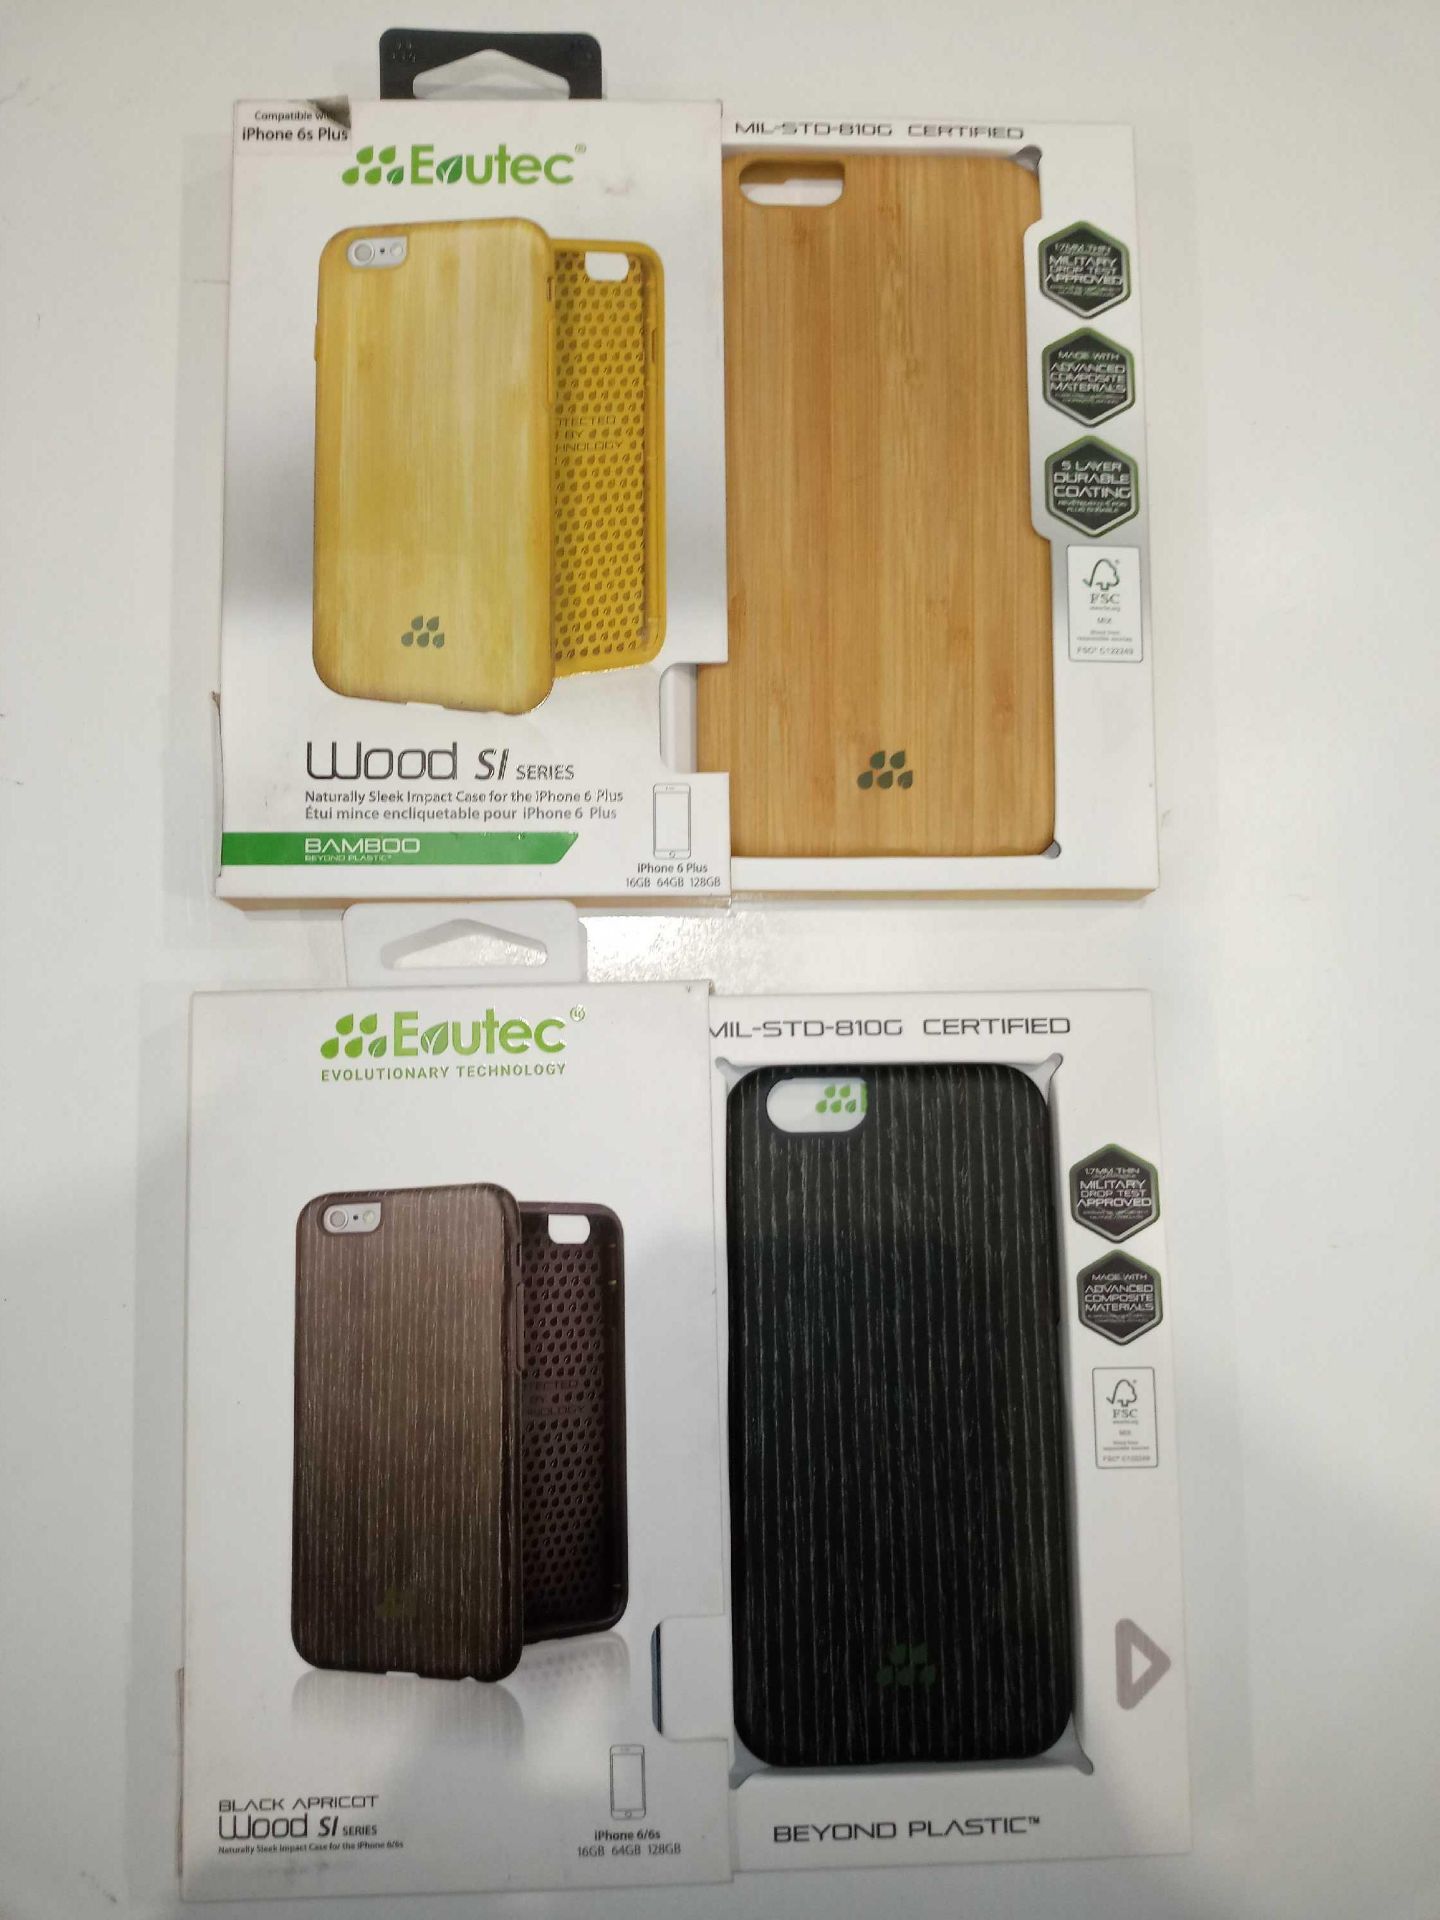 Boxed To Contain 20 Assorted Evutec Iphone 6/6S Cases